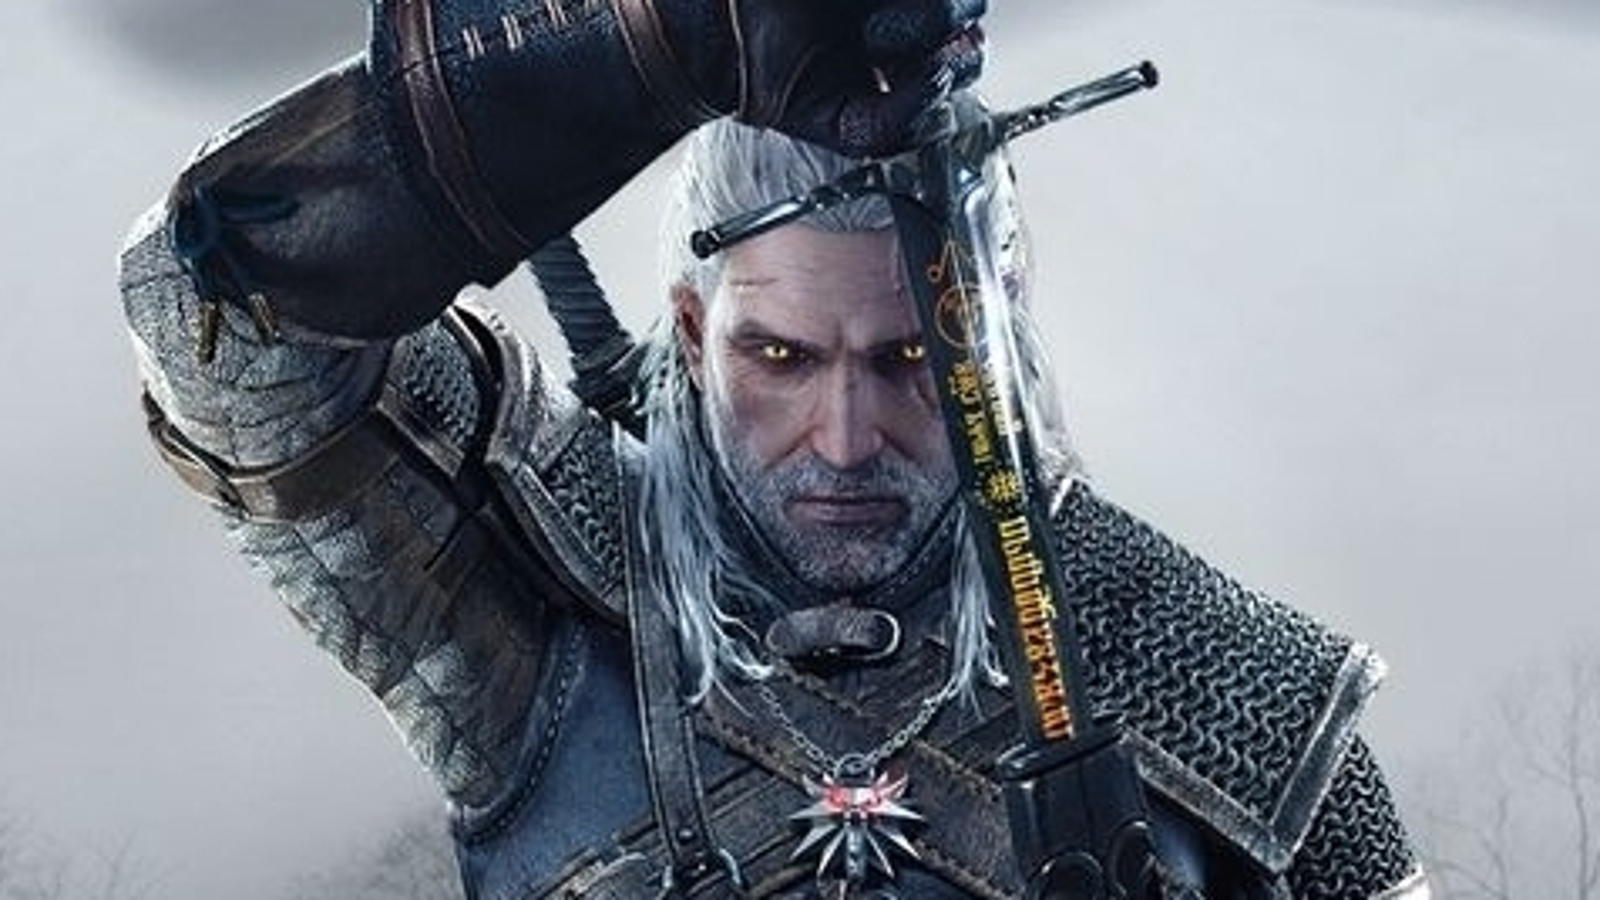 You Need To Get The Witcher 3's New Netflix Armor Quest & Set